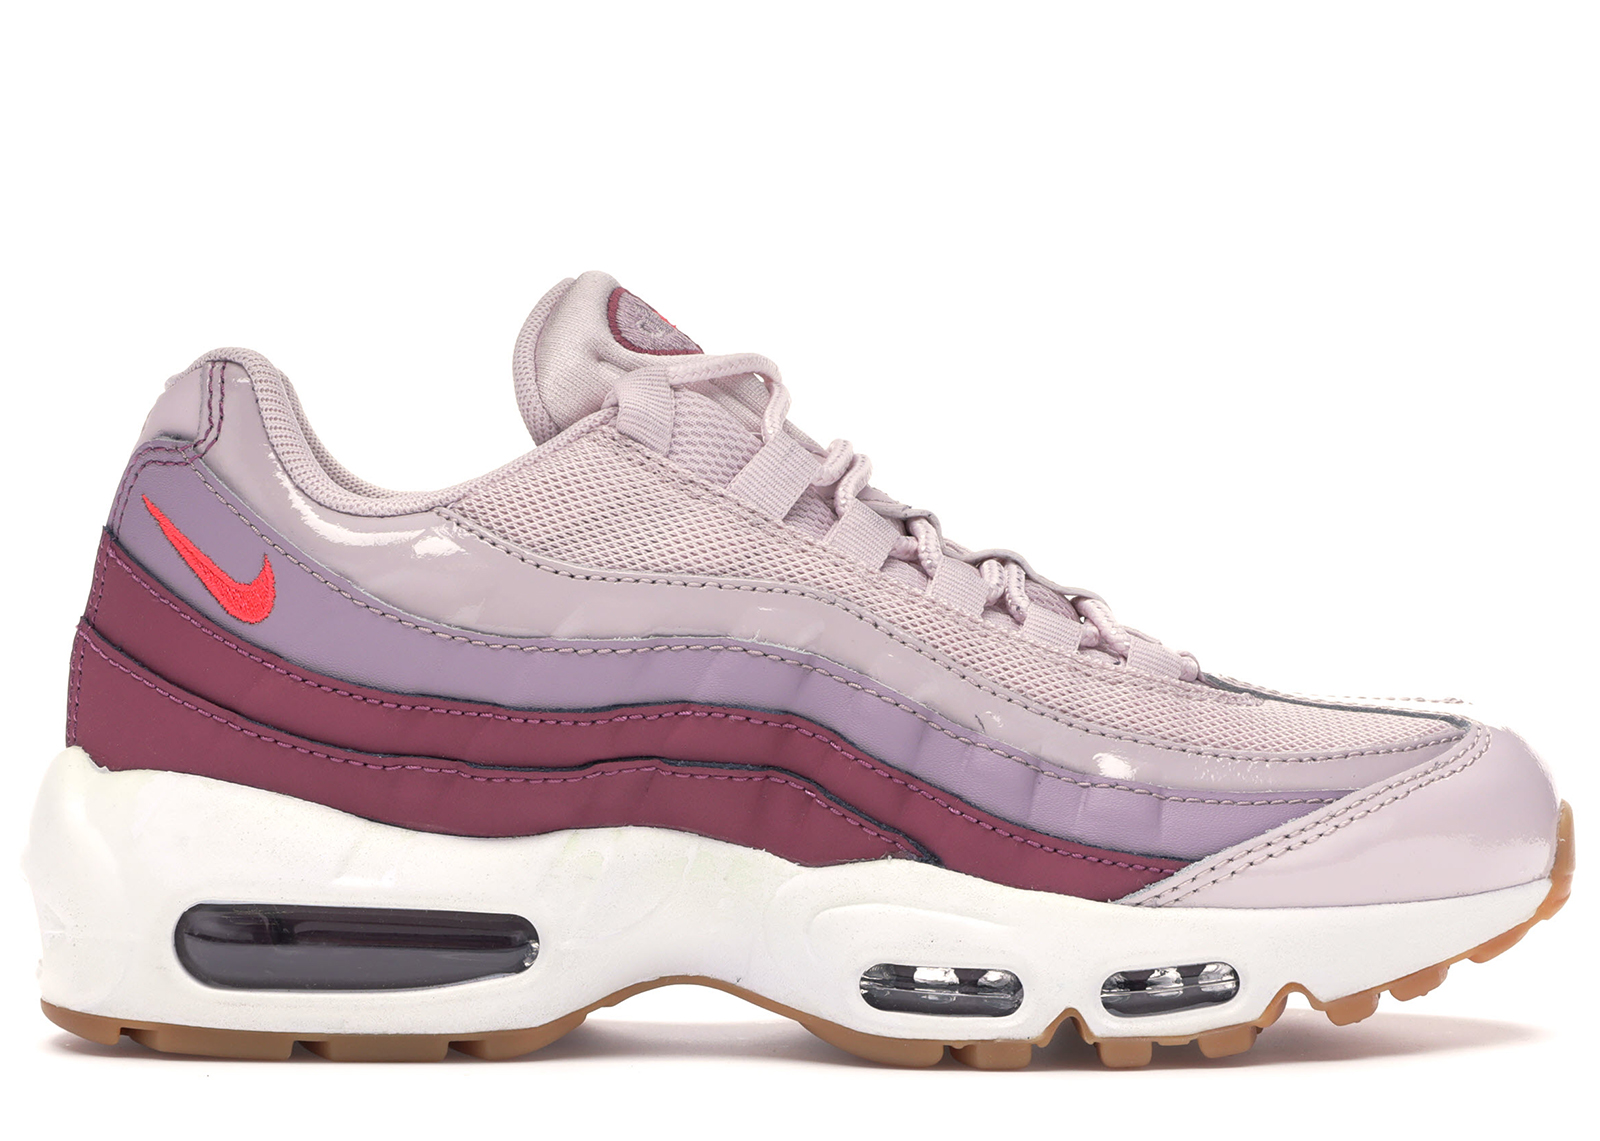 Nike Air Max 95 Barely Rose Hot Punch (Women's) - 307960-603 - US